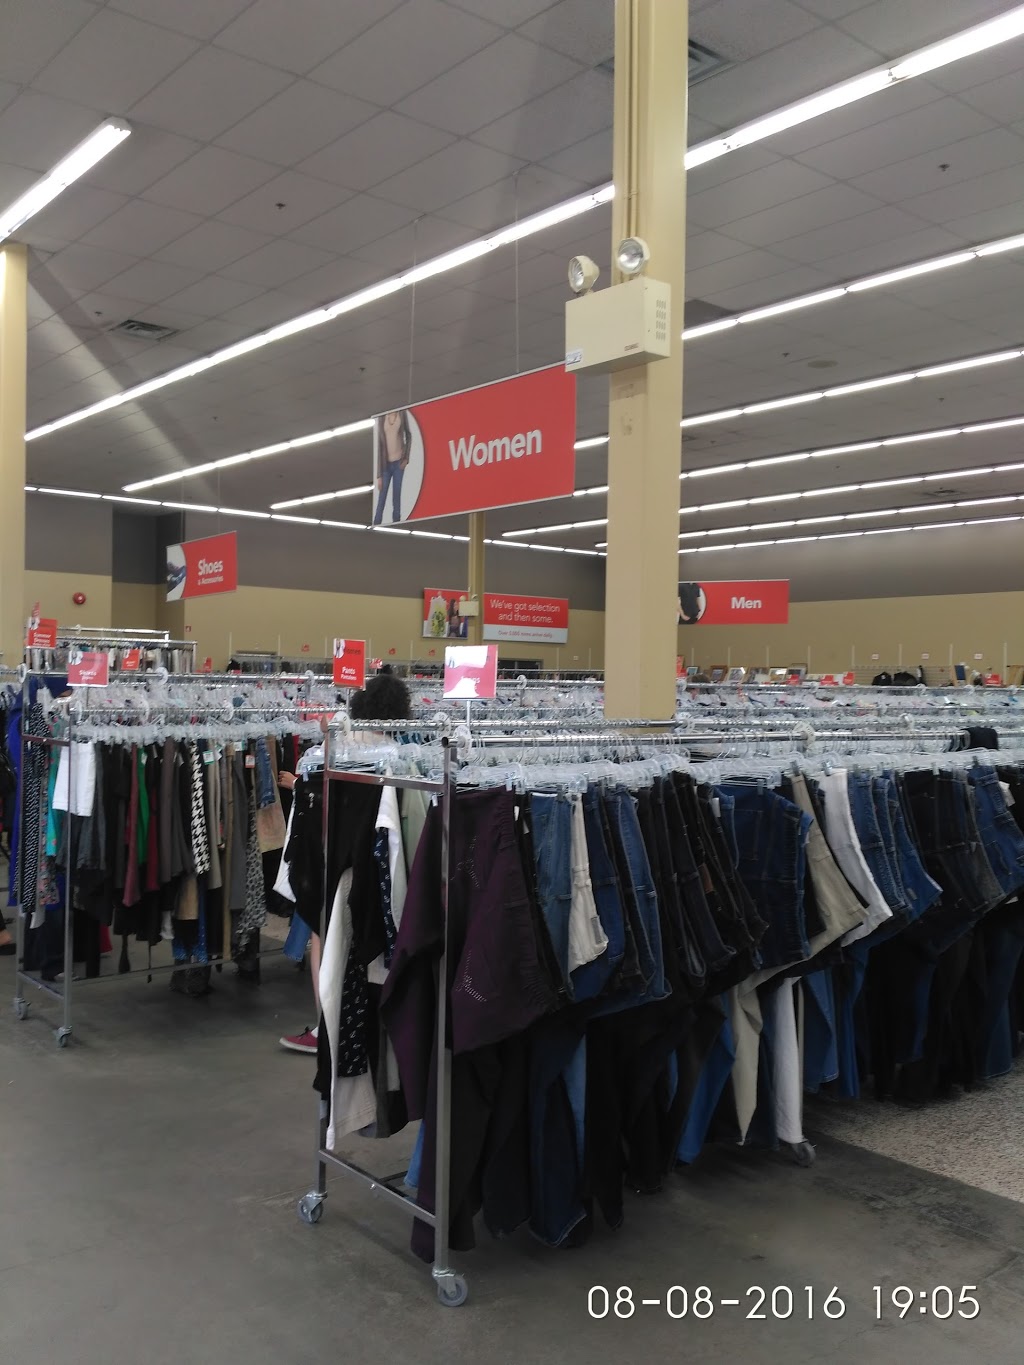 Value Village | book store | 1651 Merivale Rd, Nepean, ON K2G 3K2, Canada | 6132881390 OR +1 613-288-1390